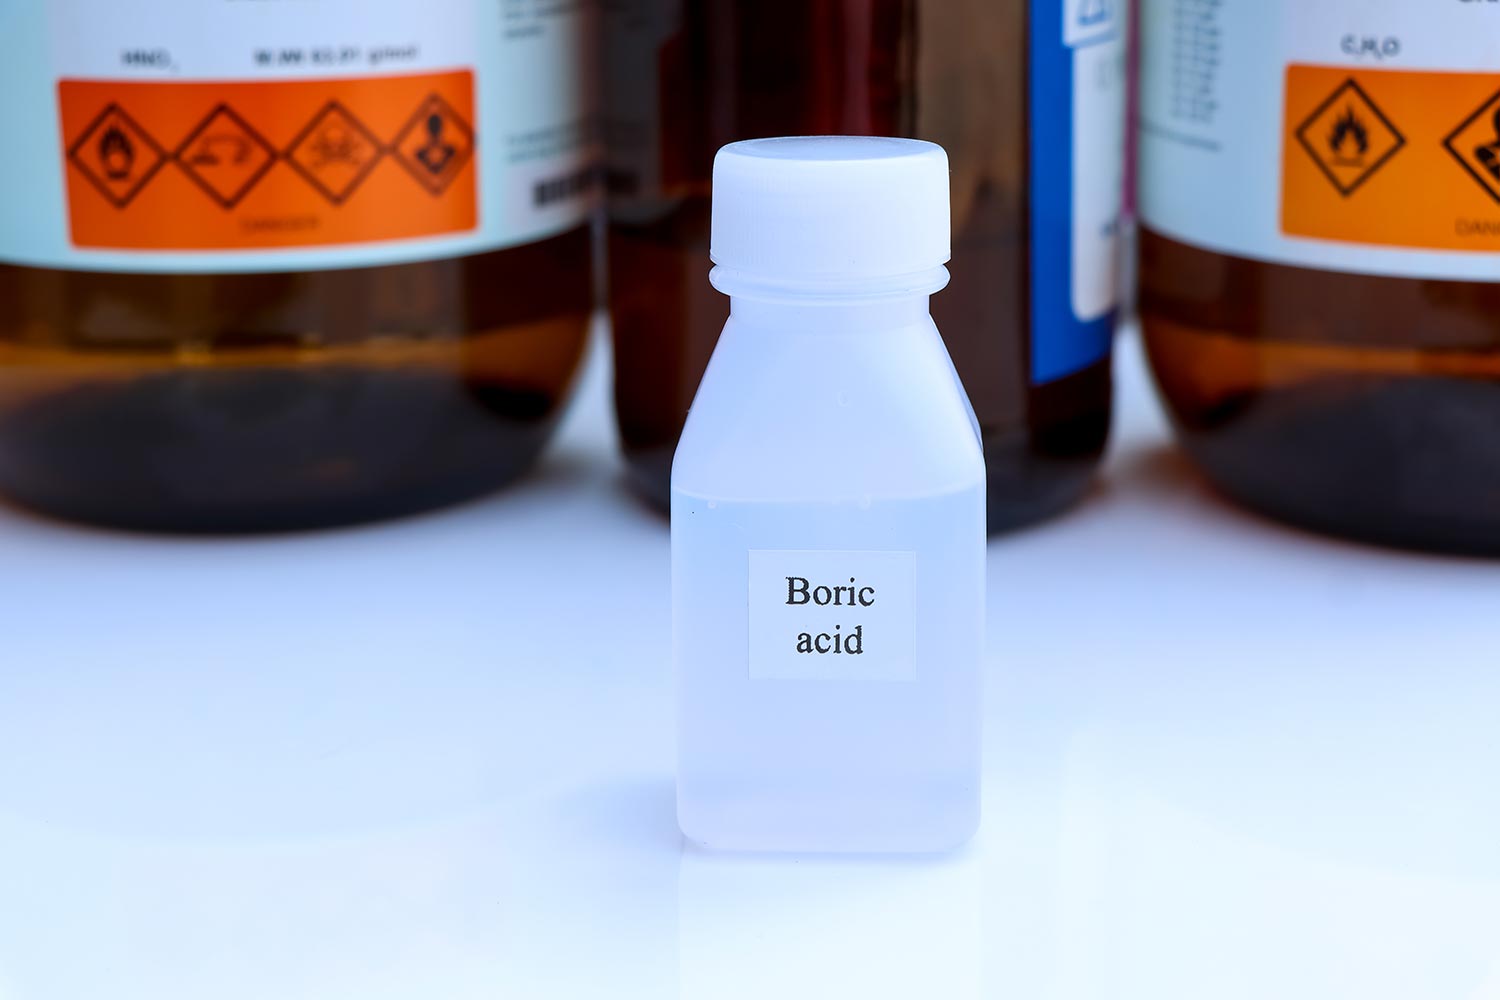 Boric acid a chemical used in the laboratory